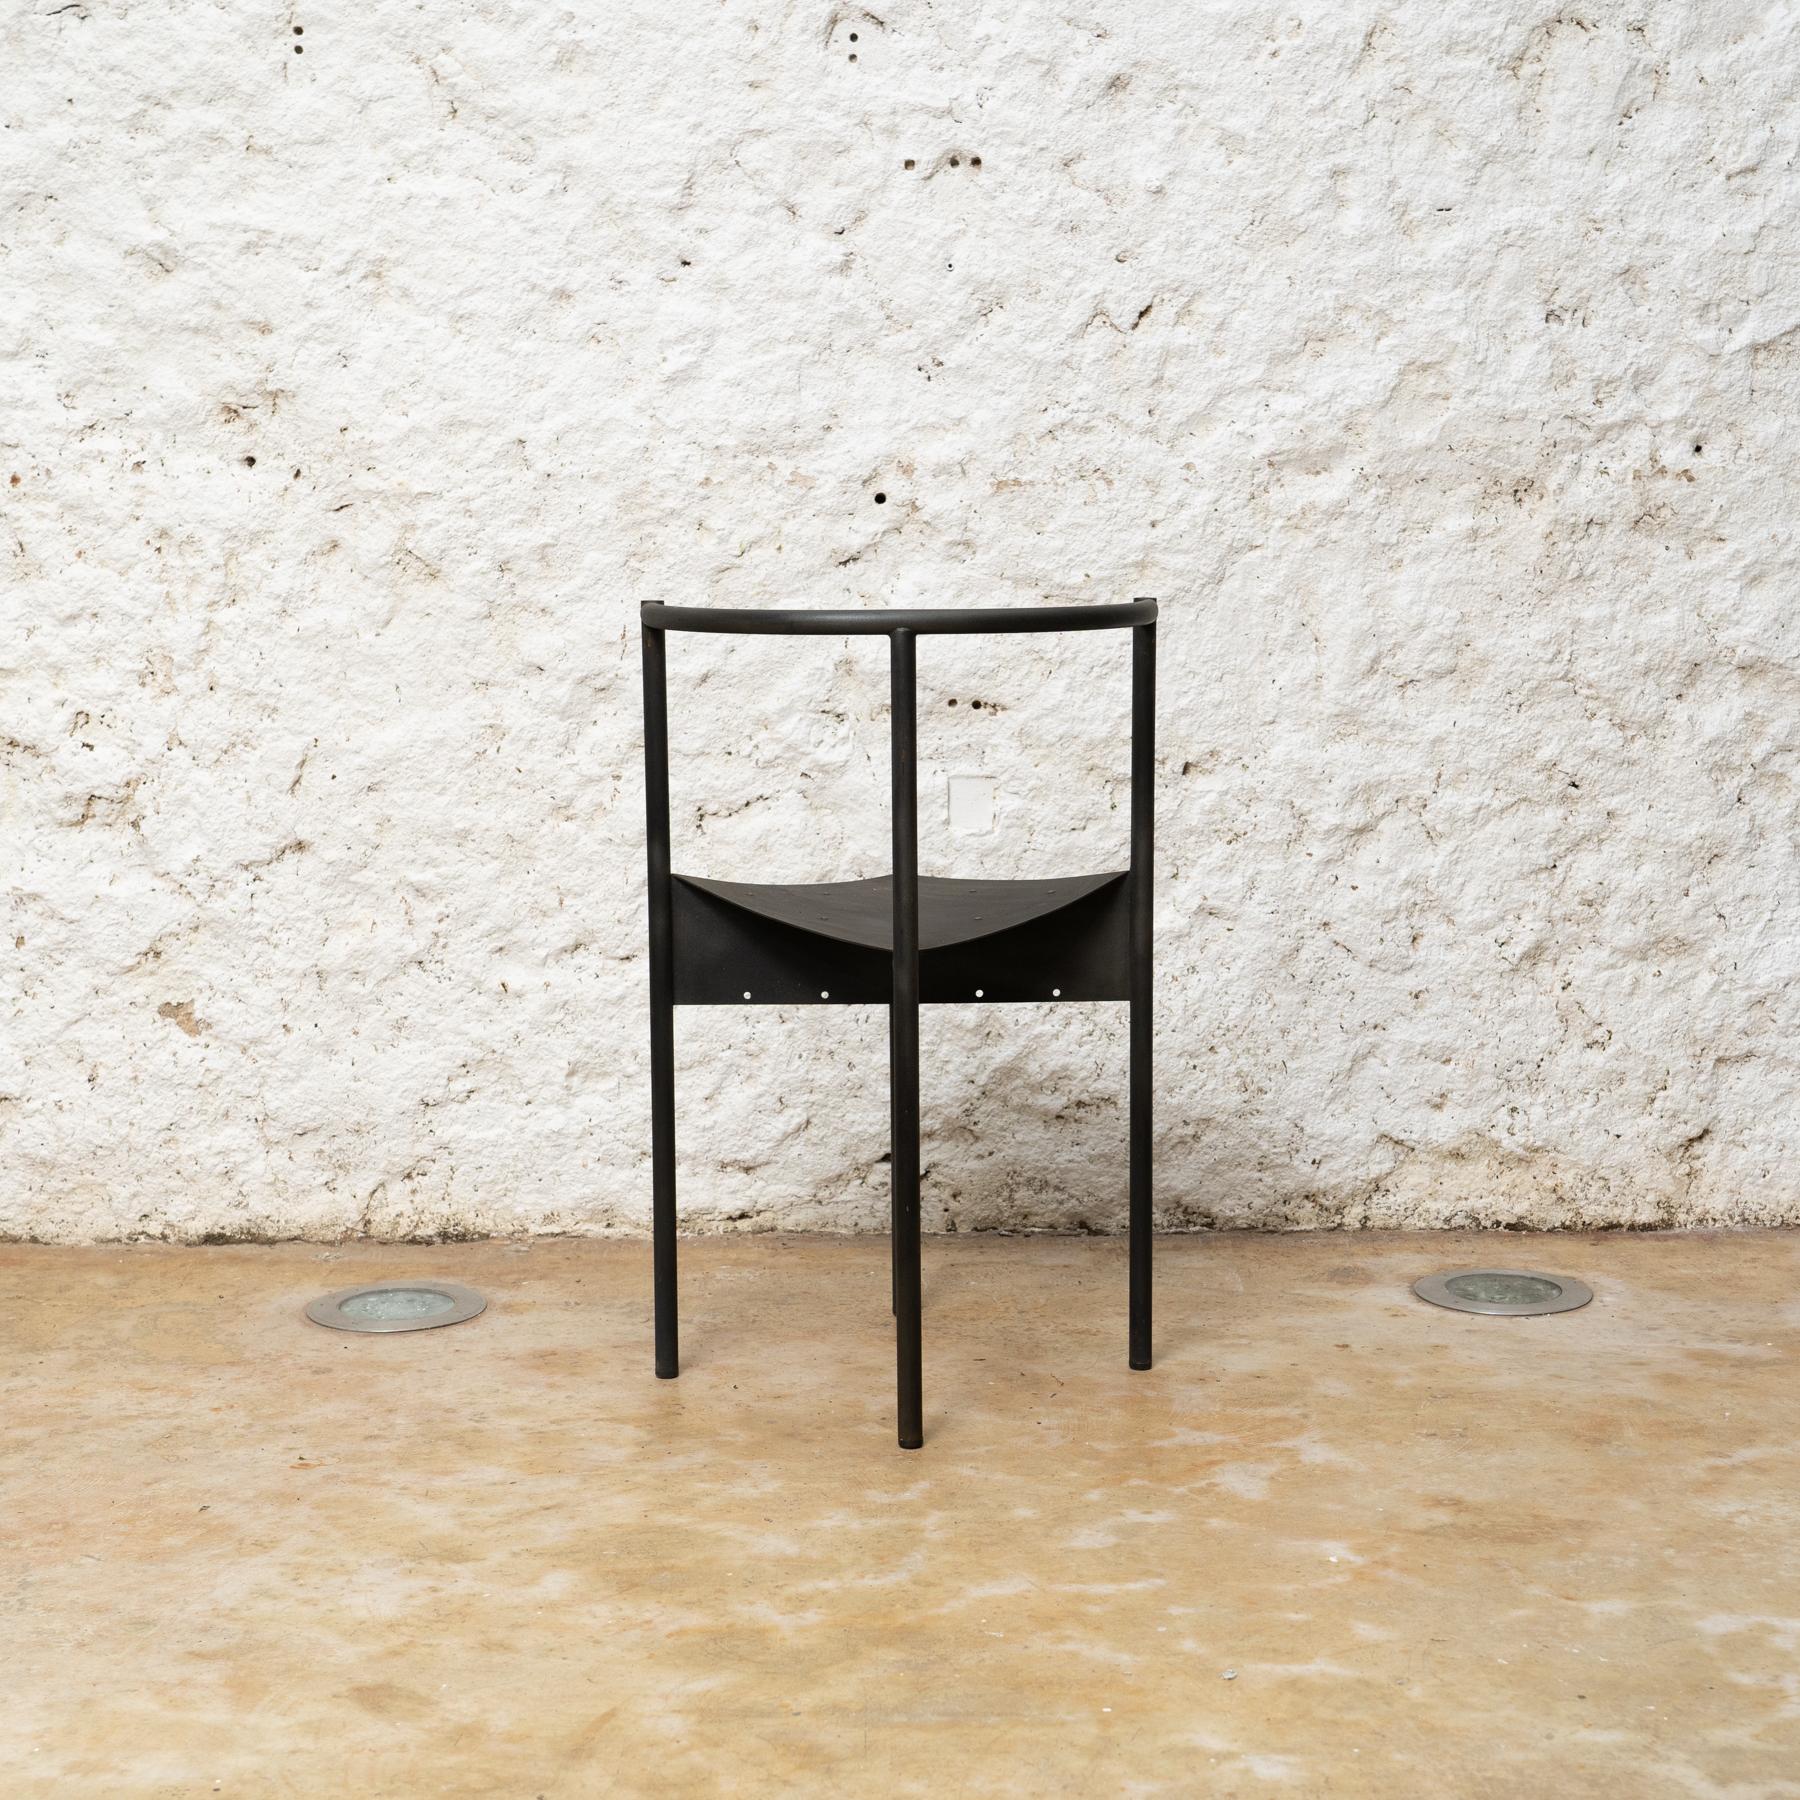 Late 20th Century Chair Wendy Wright by Phillipe Starck for Disform, circa 1983 For Sale